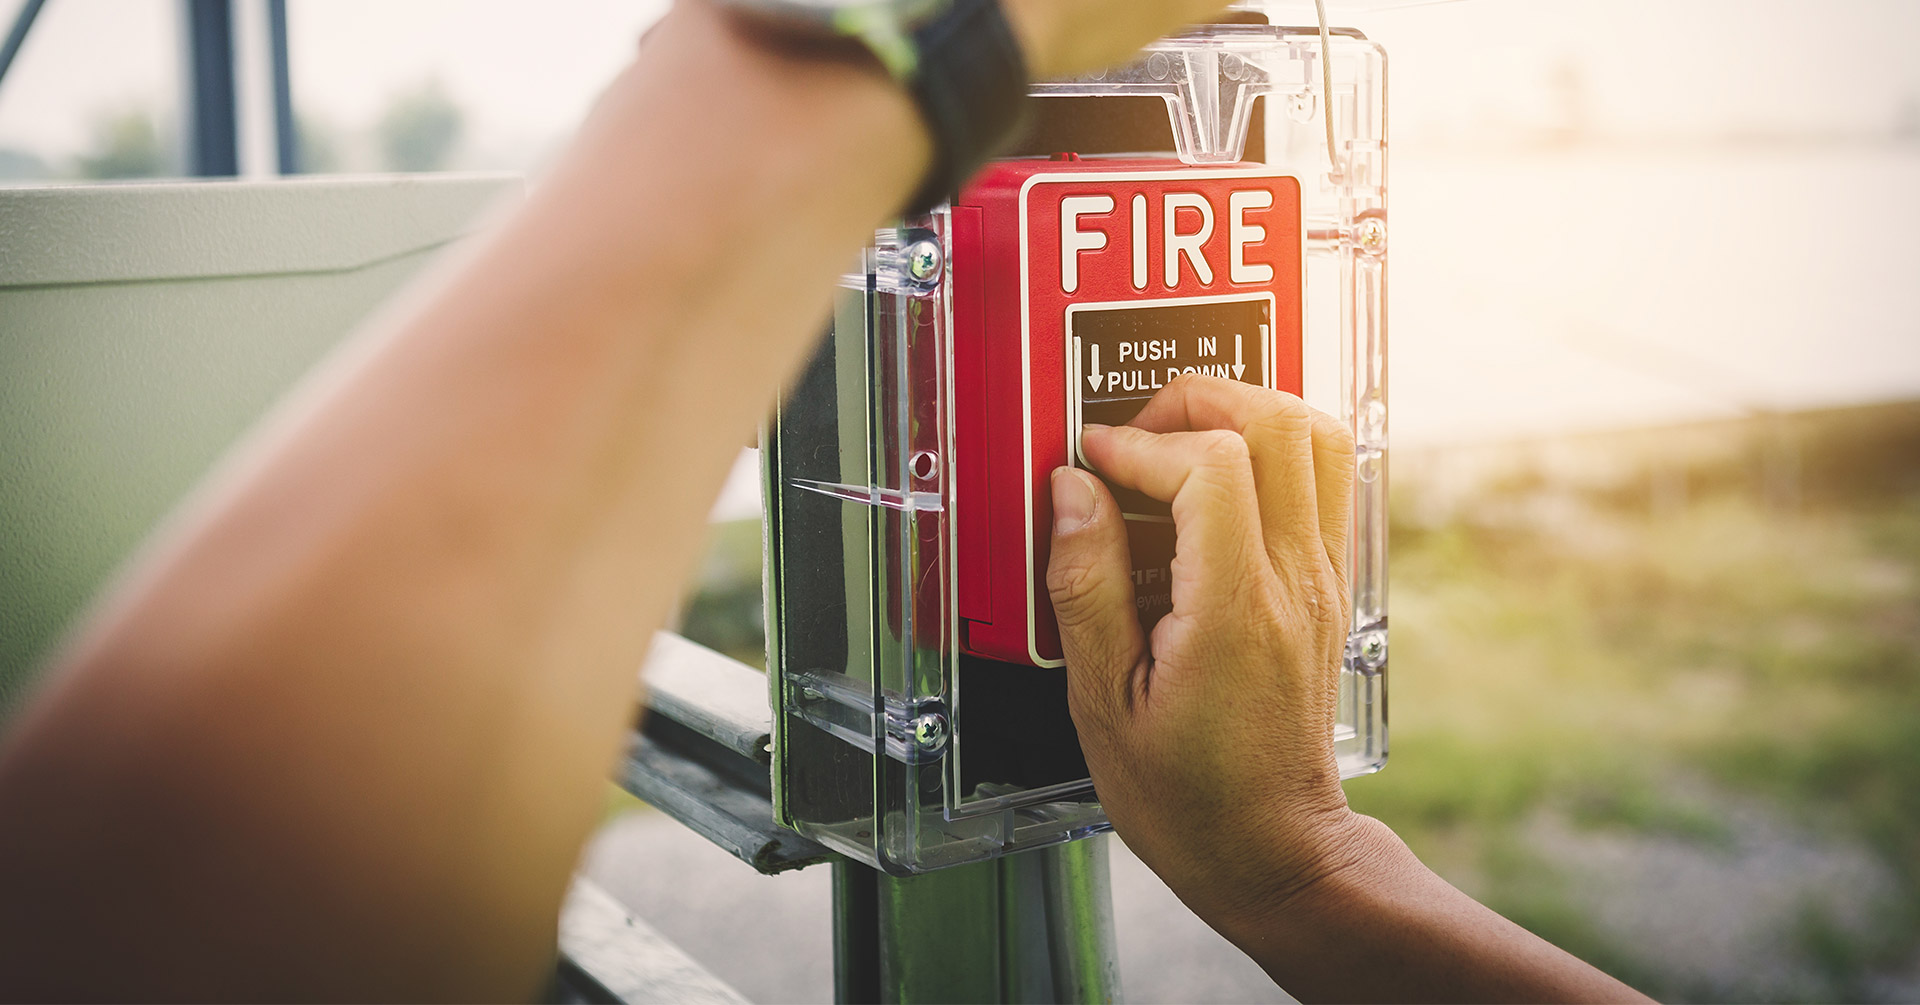 Common Fire Hazards in the Workplace and How to Avoid Them